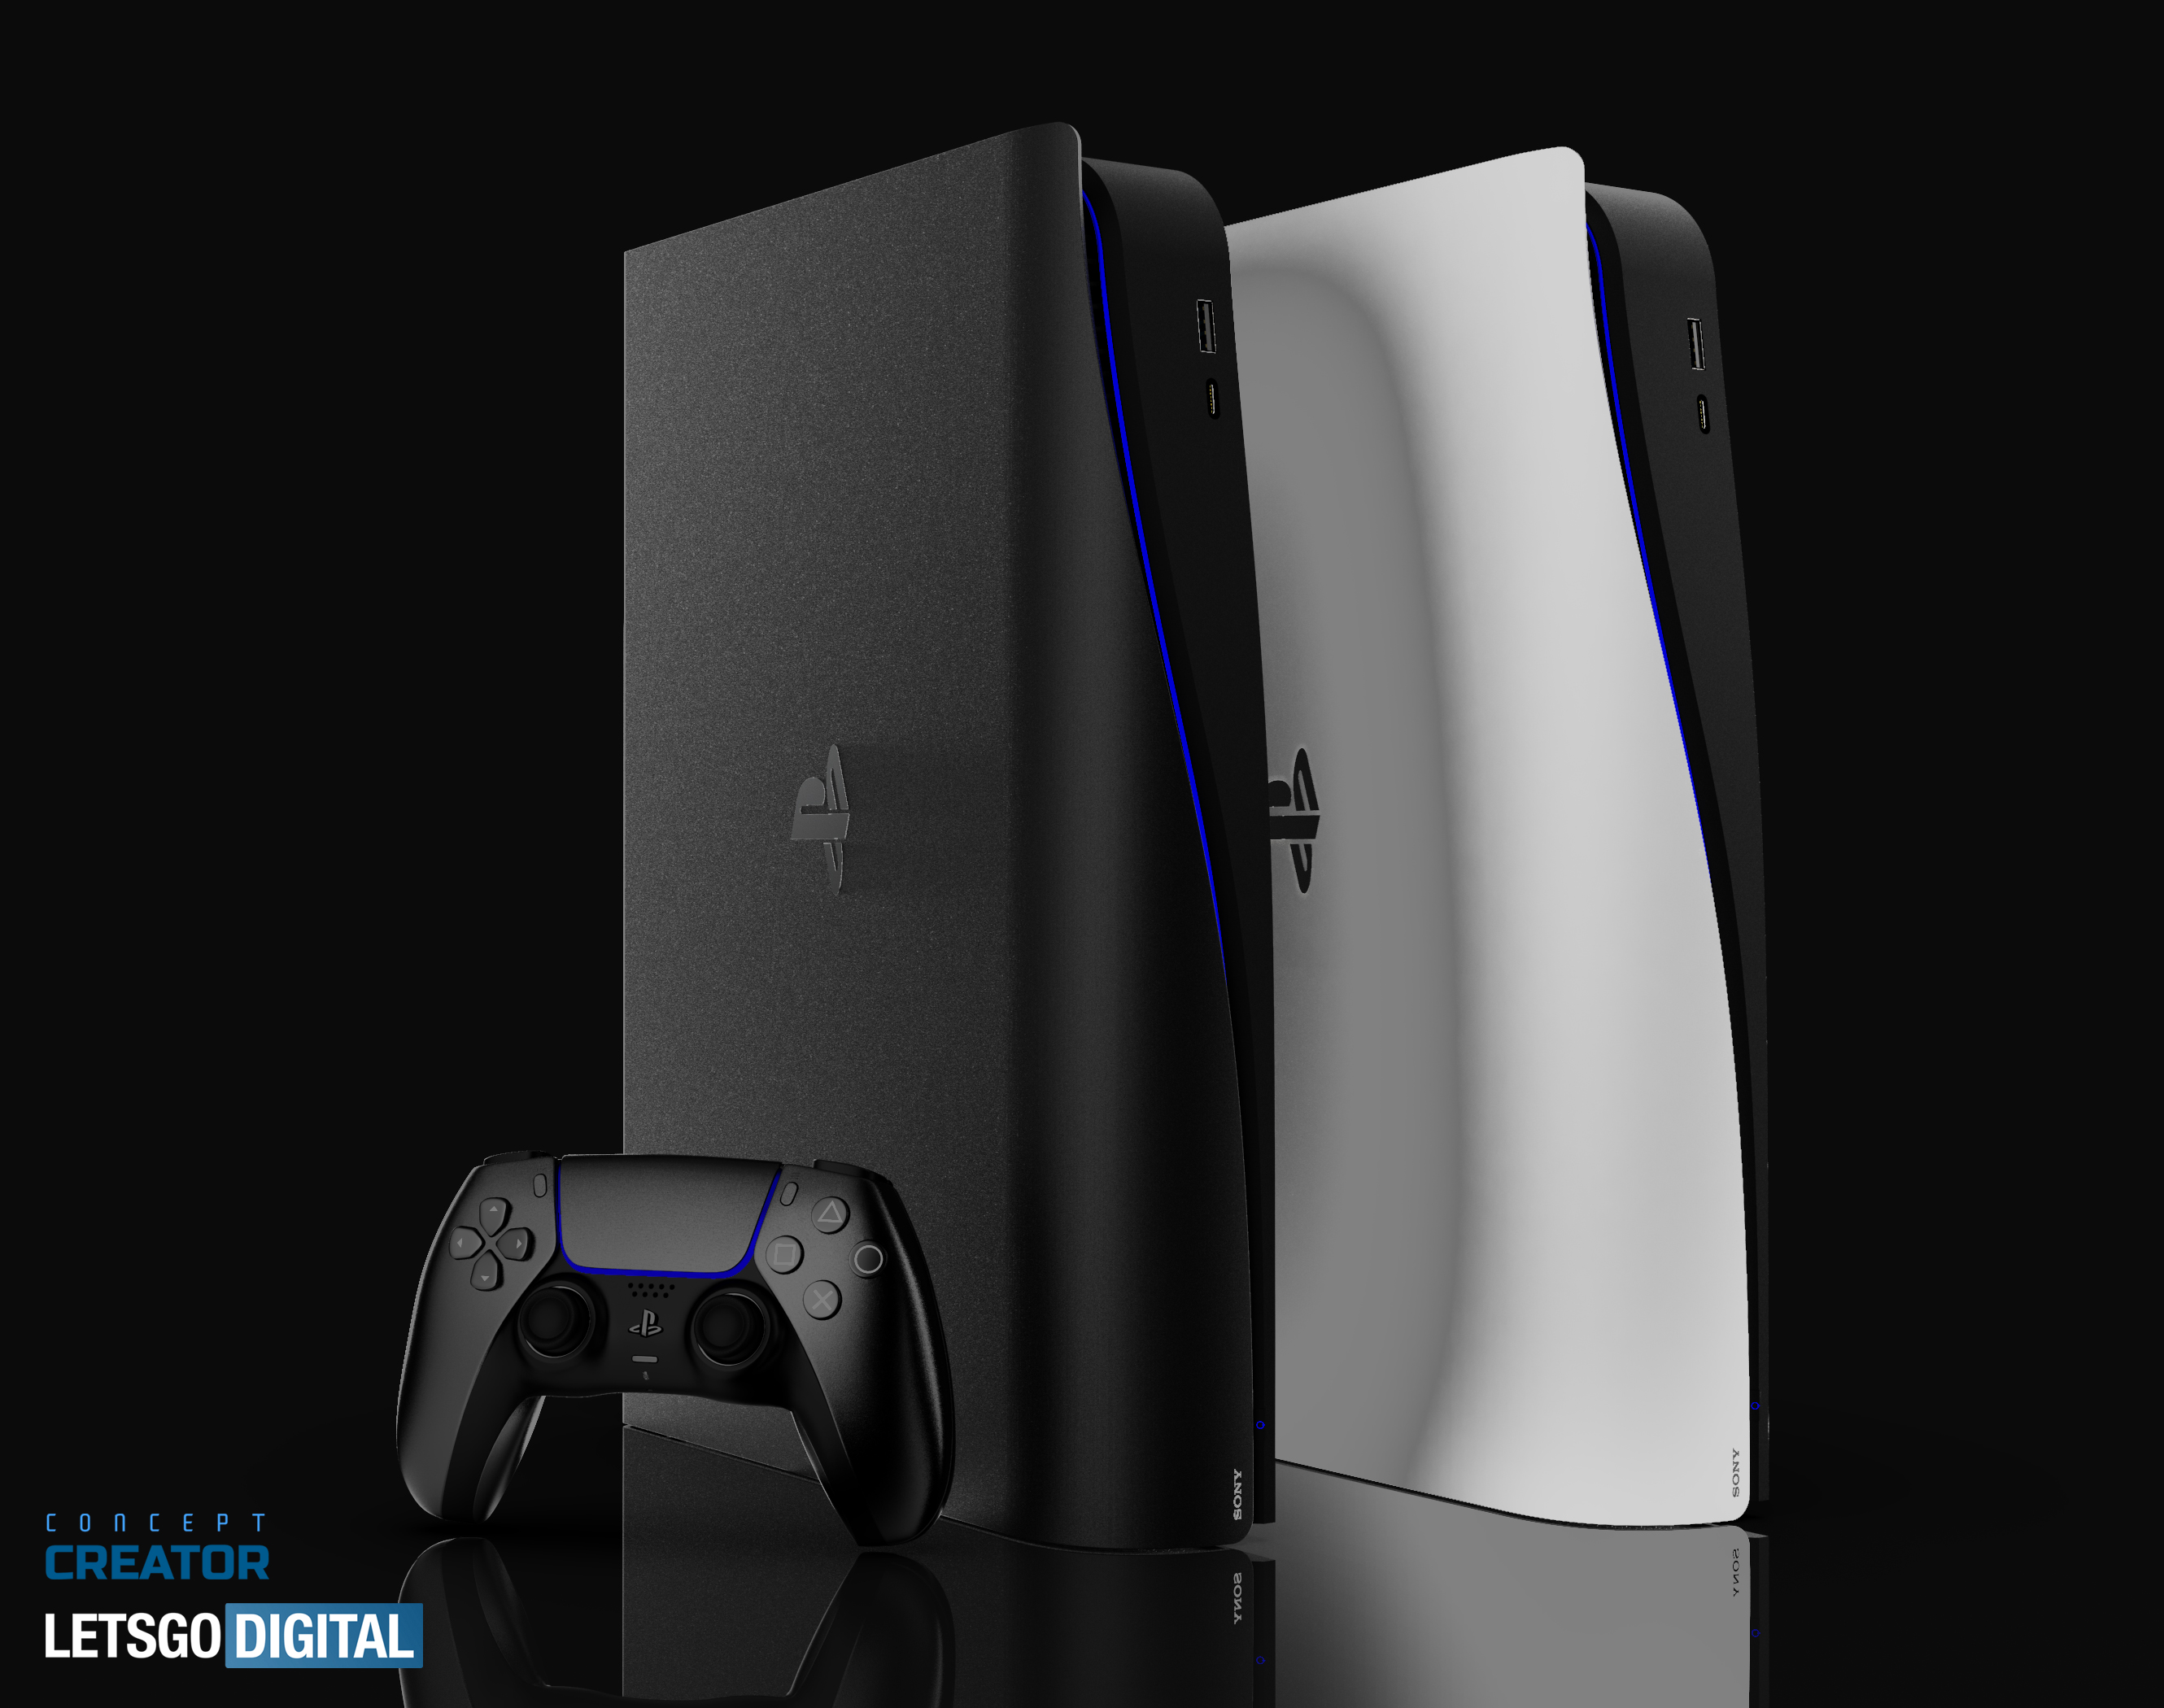 will the ps5